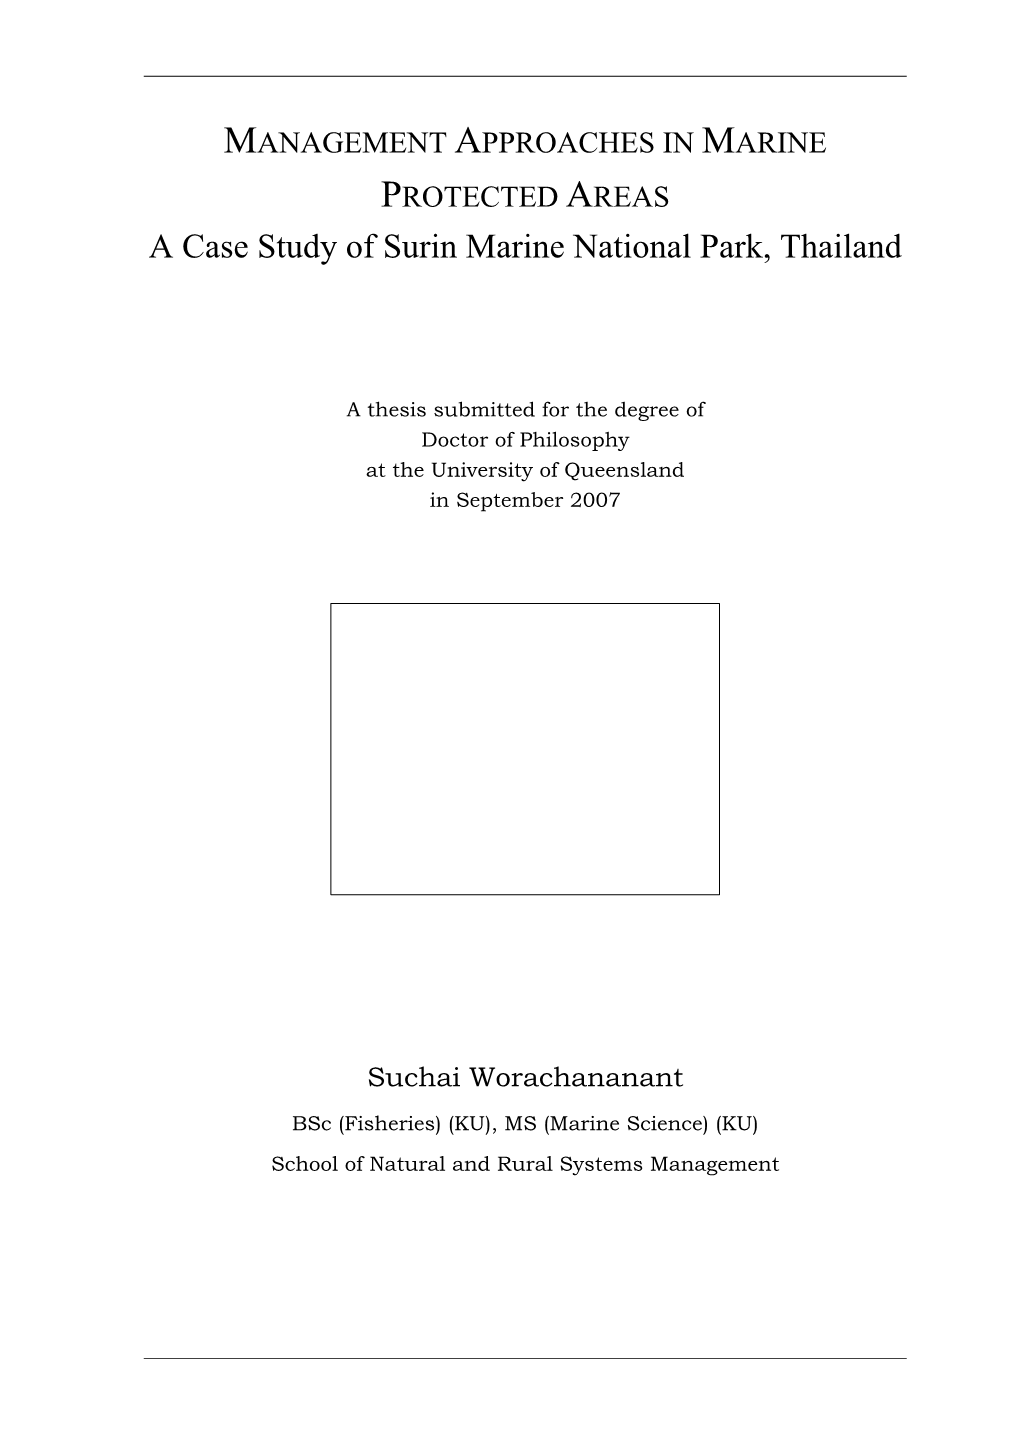 MANAGEMENT APPROACHES in MARINE PROTECTED AREAS a Case Study of Surin Marine National Park, Thailand